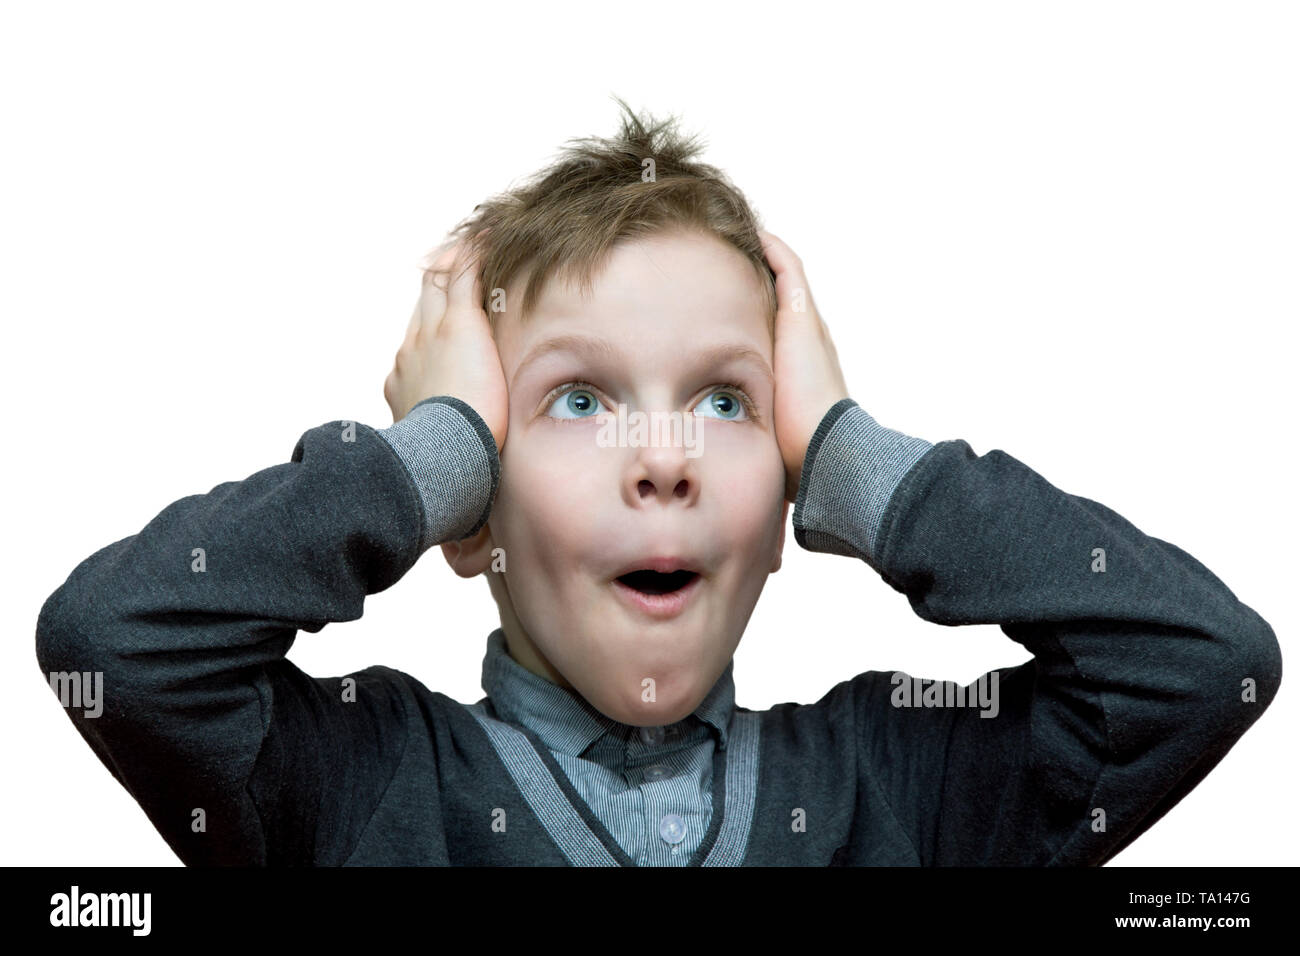 the boy with a surprised look clutched at his head. Isolated on white background Stock Photo